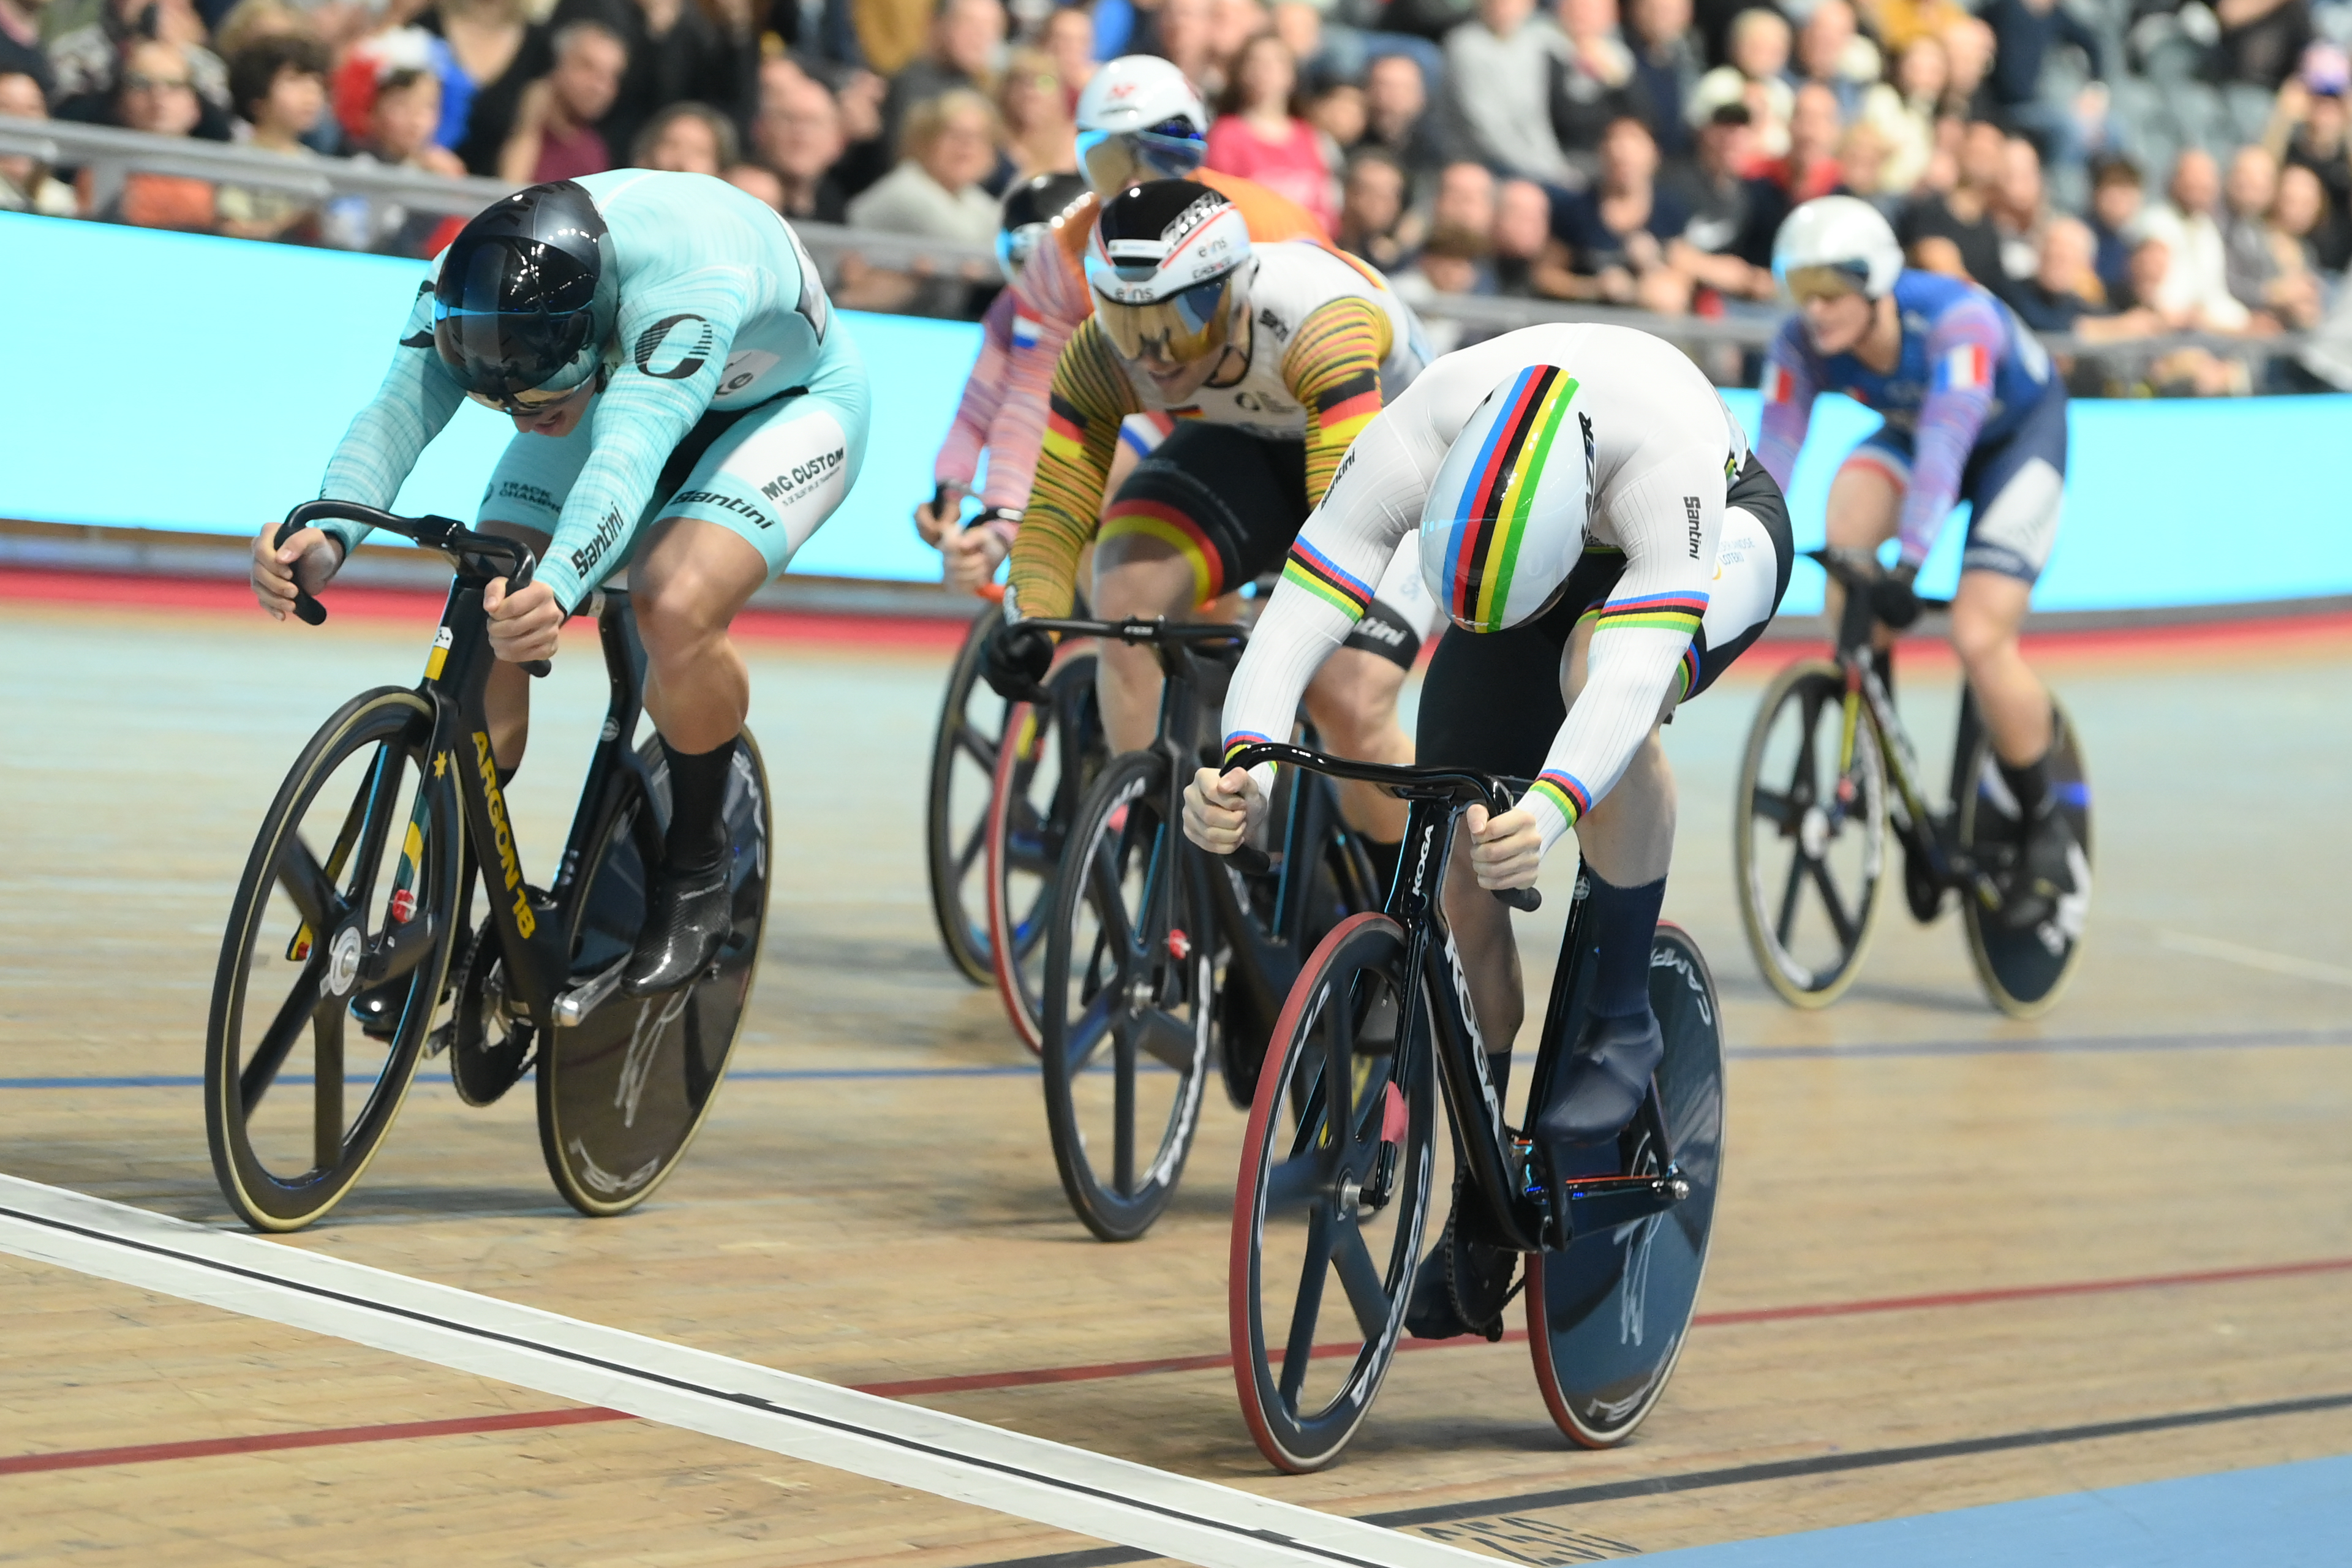 Matthew Richardson in keirin final at UCI Track Champions League